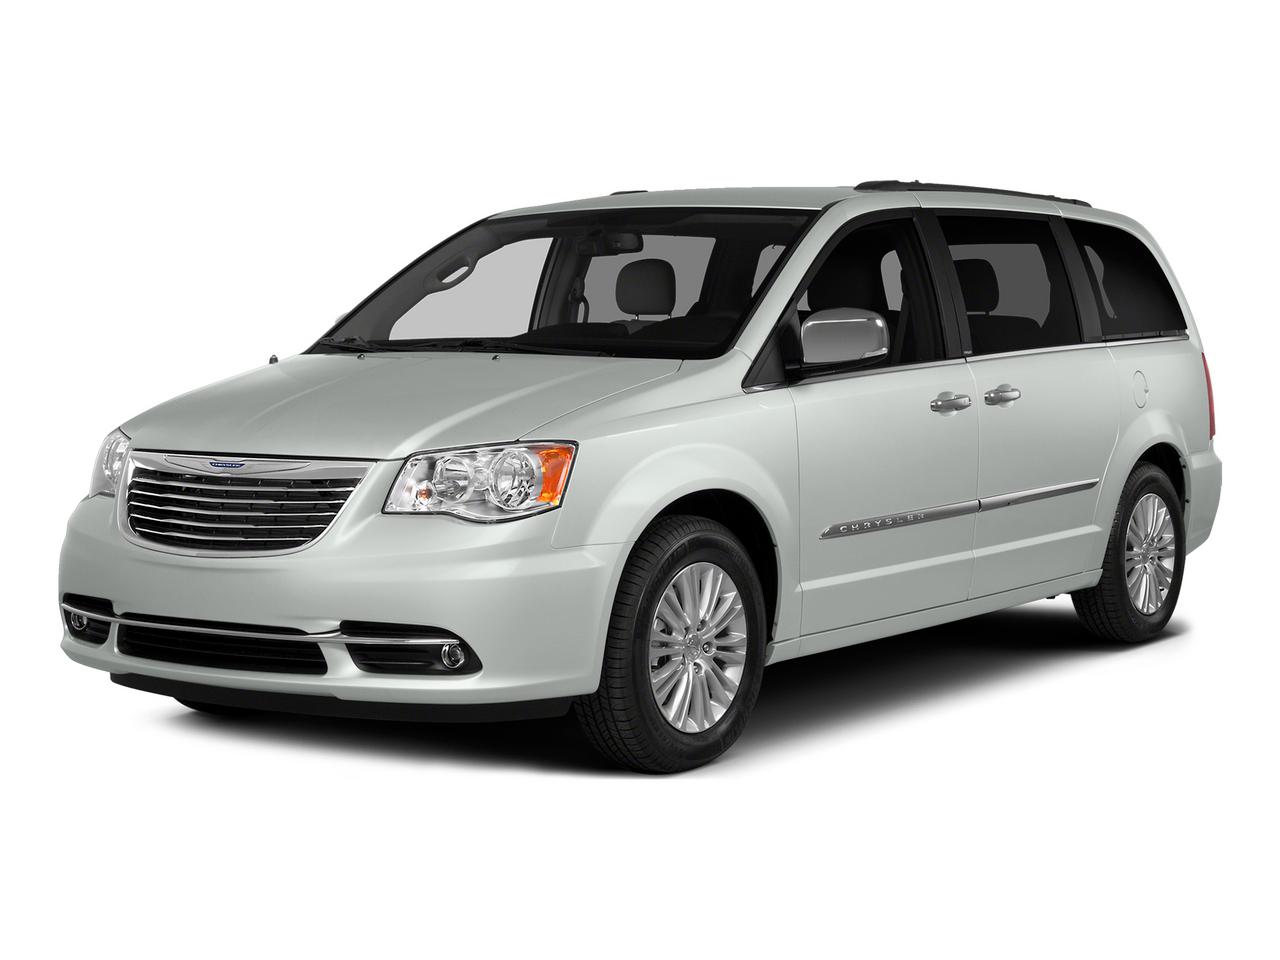 2015 Chrysler Town & Country Vehicle Photo in Pembroke Pines, FL 33027